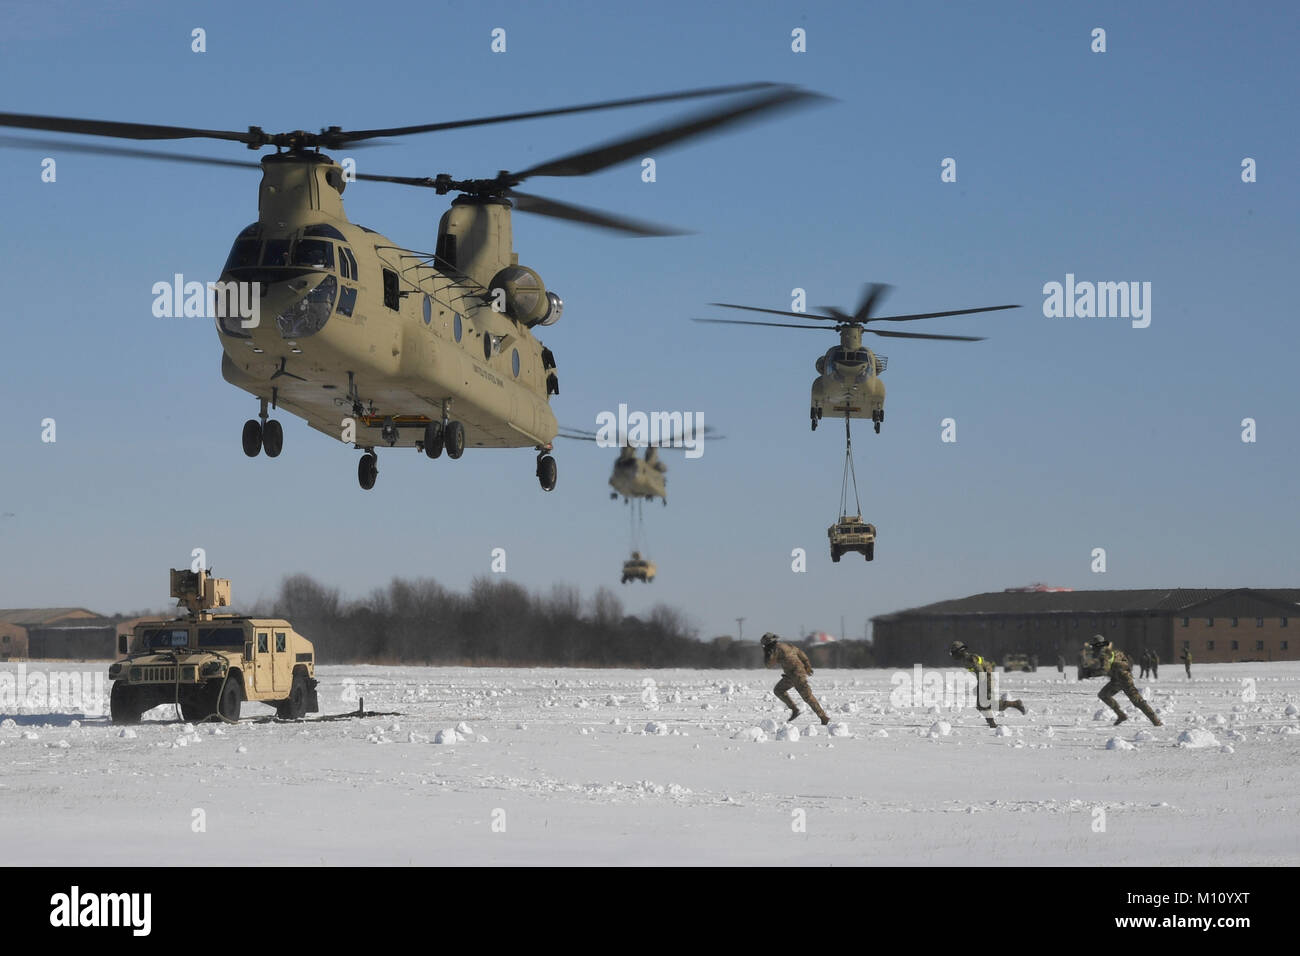 Soldiers with Company B, 6th General Support Aviation Battalion, 101st Combat Aviation Brigade, 101st Airborne Division (Air Assault) and the 3rd Brigade Combat Team participate in a large-scale air assault training exercise January 19, 2018 at Fort Campbell, Kentucky. The training event demonstrated the troop’s readiness to deploy and ability to integrate land operations with air support. (U.S. Army photo by Sgt. 1st Class Andrew McClure, 101st Combat Aviation Brigade) Stock Photo